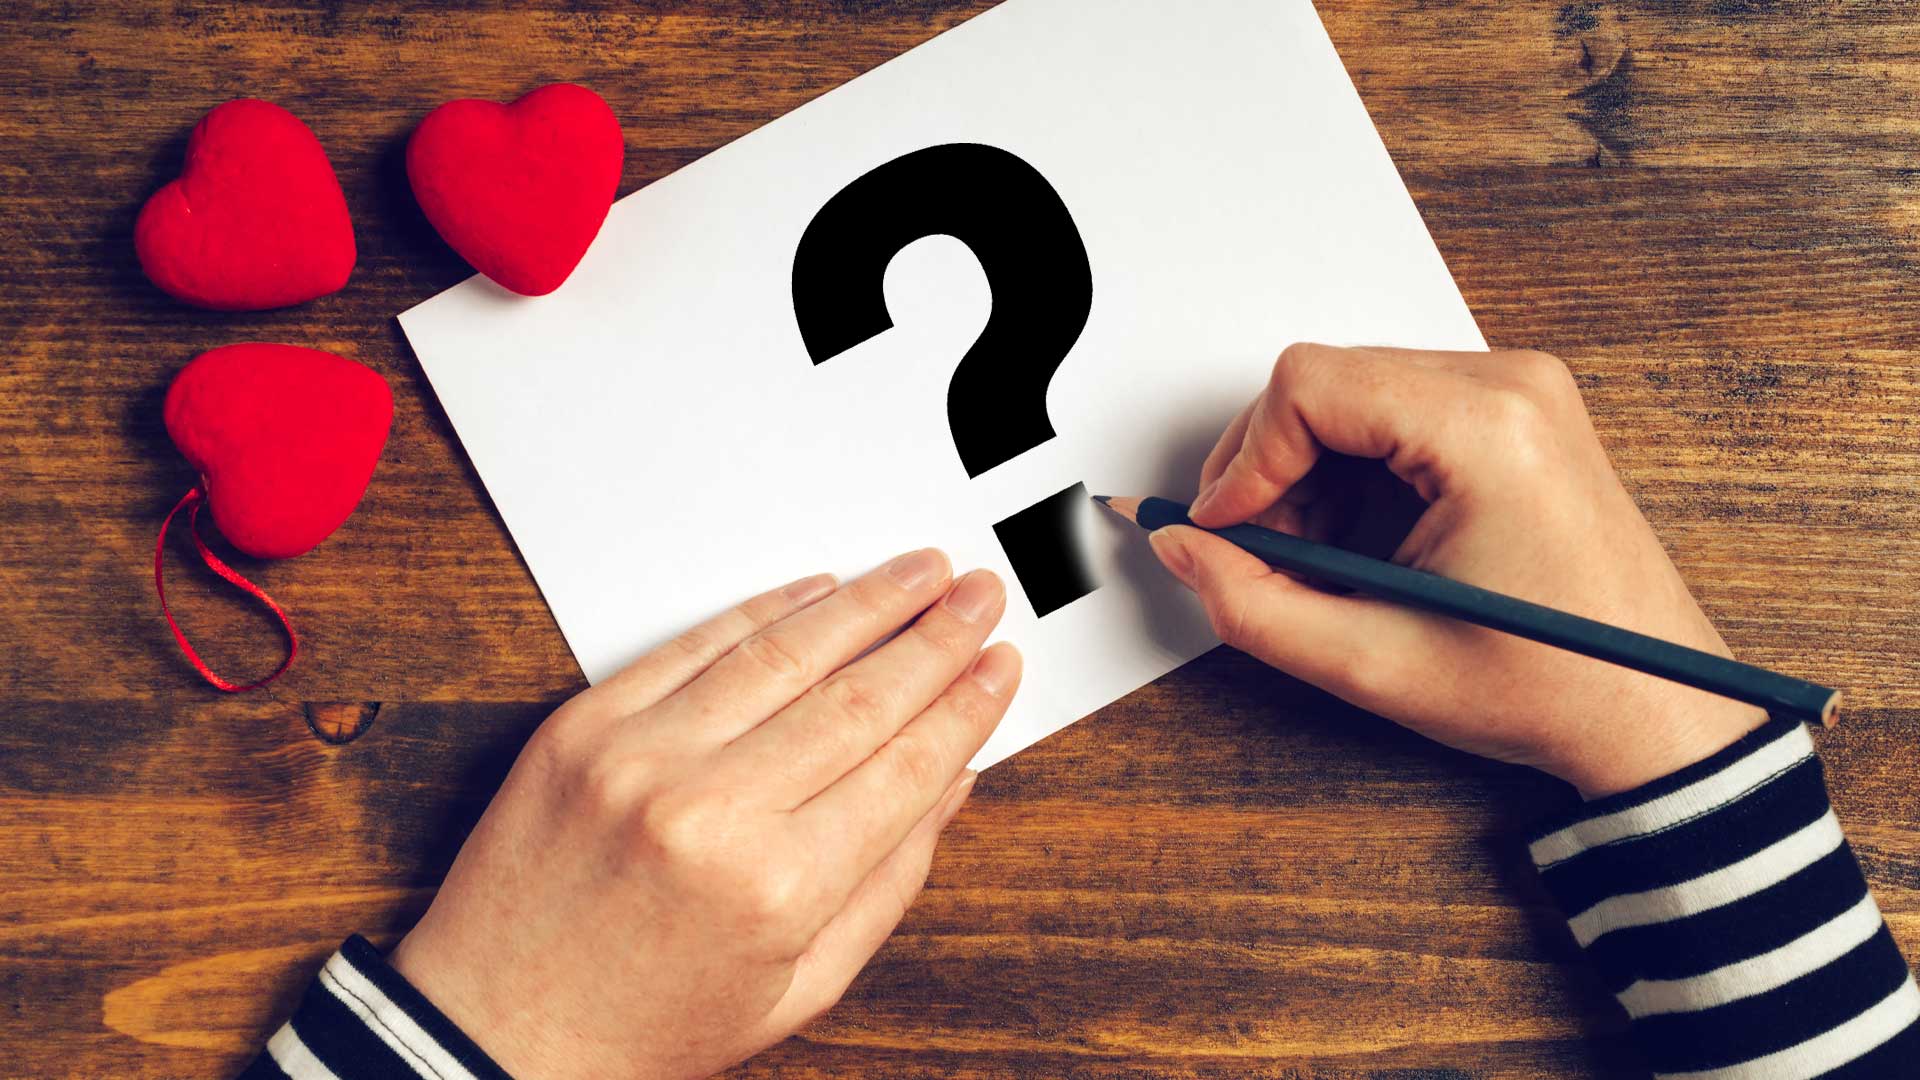 A person drawing a question mark on a Valentine's Day card